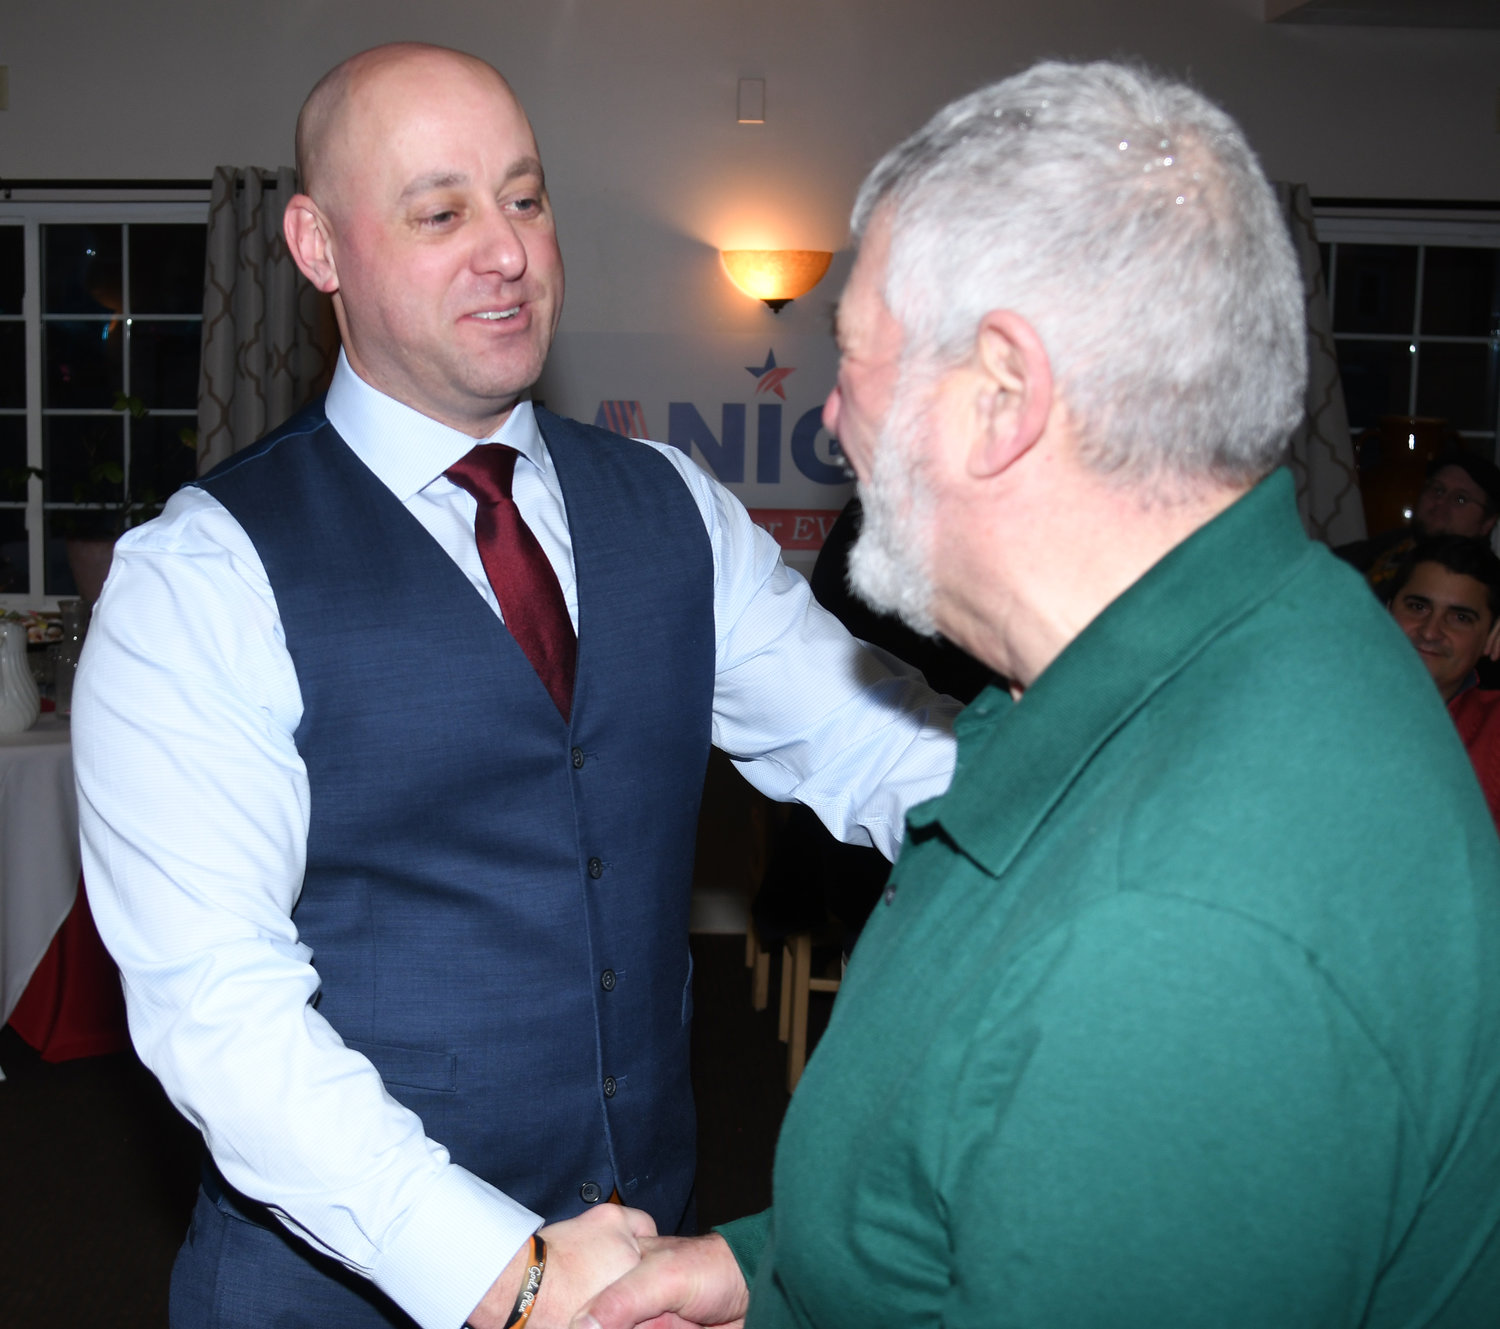 Rome mayoral candidate Jeffrey M. Lanigan shakes the hand of supporter Paul Nasci before the start of his announcement at the Franklin Hotel in Rome Tuesday evening.